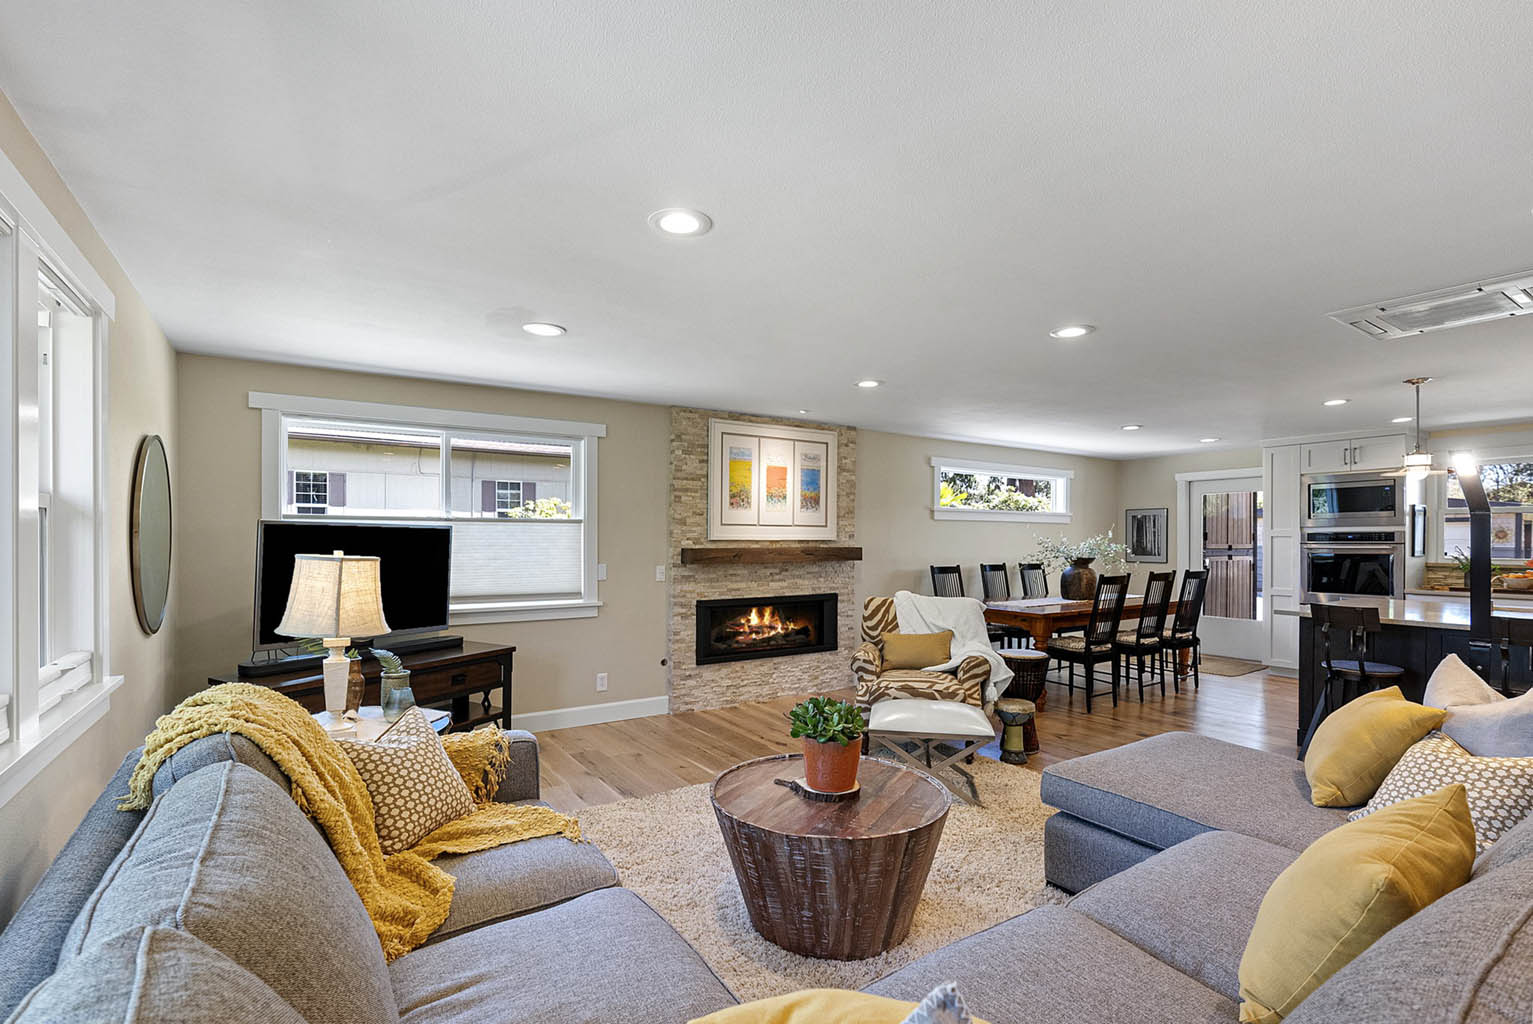 Open concept floor plan with gas fireplace